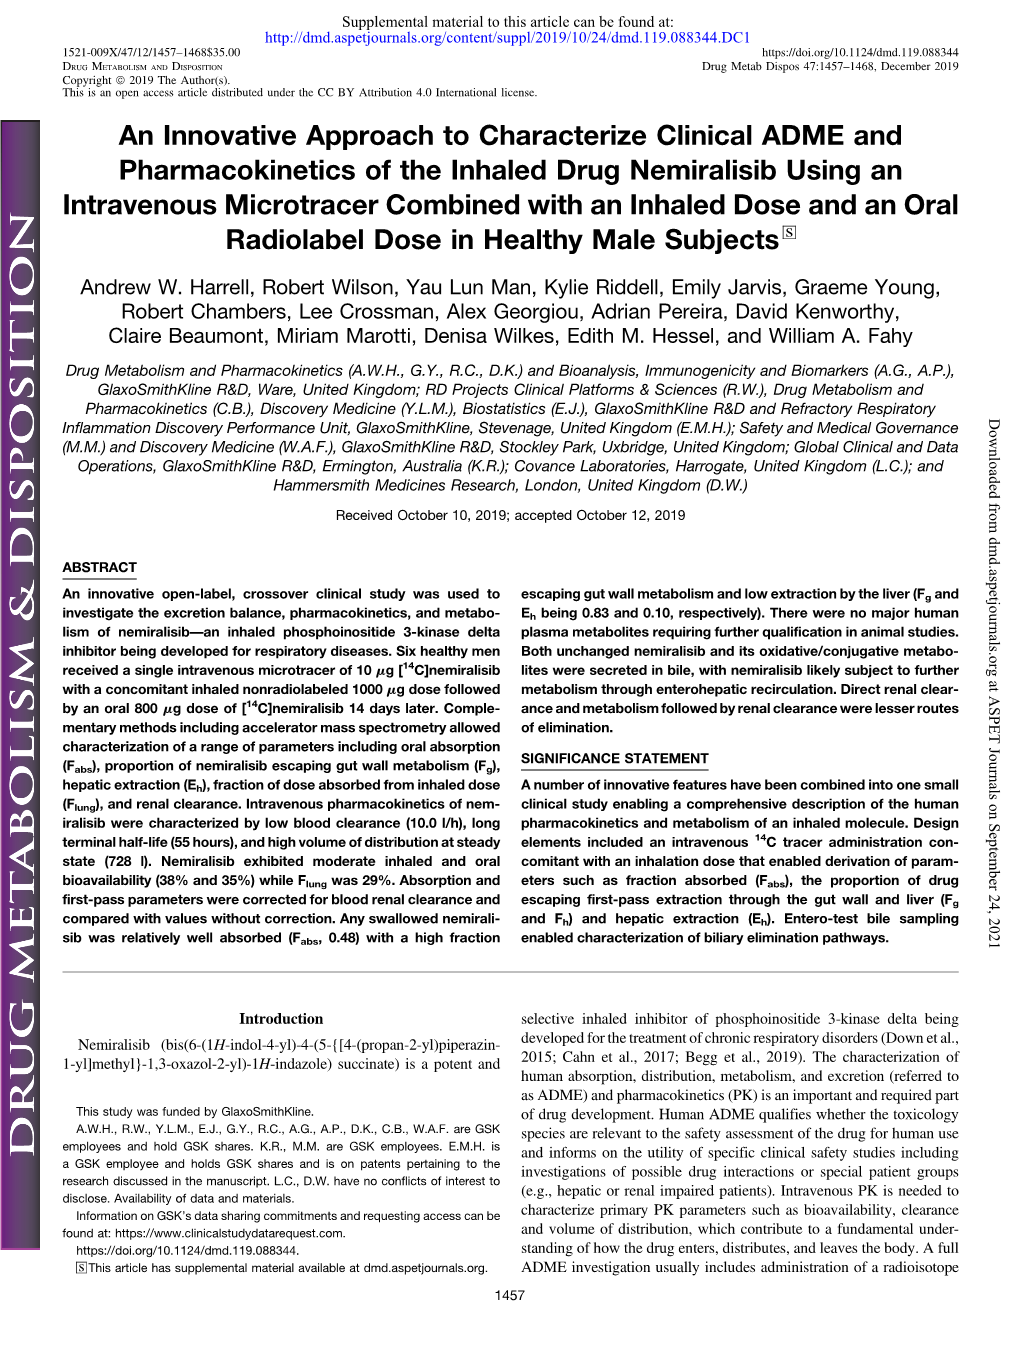 An Innovative Approach to Characterize Clinical ADME and Pharmacokinetics of the Inhaled Drug Nemiralisib Using an Intravenous M